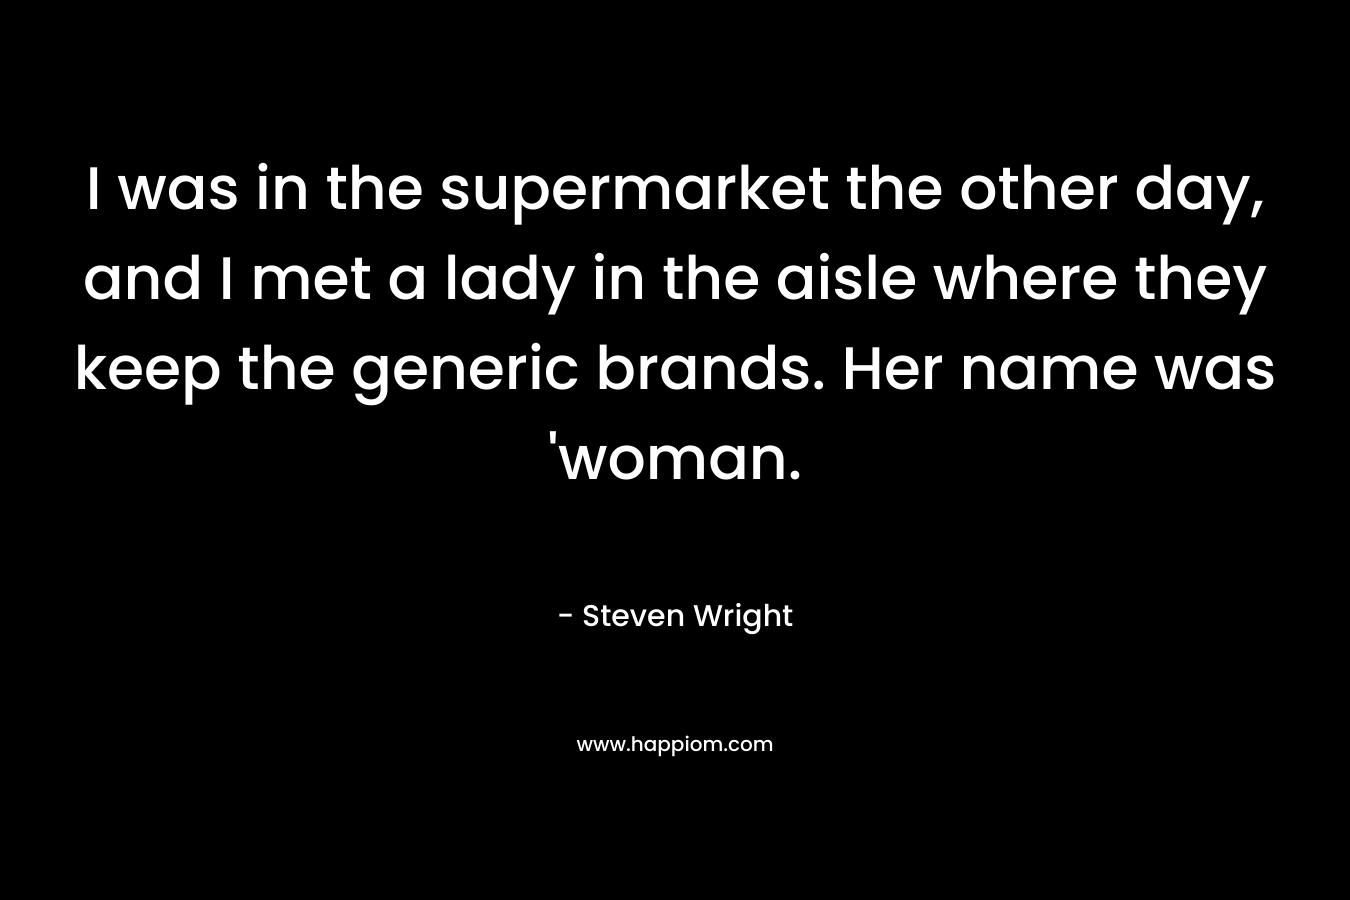 I was in the supermarket the other day, and I met a lady in the aisle where they keep the generic brands. Her name was ‘woman. – Steven Wright